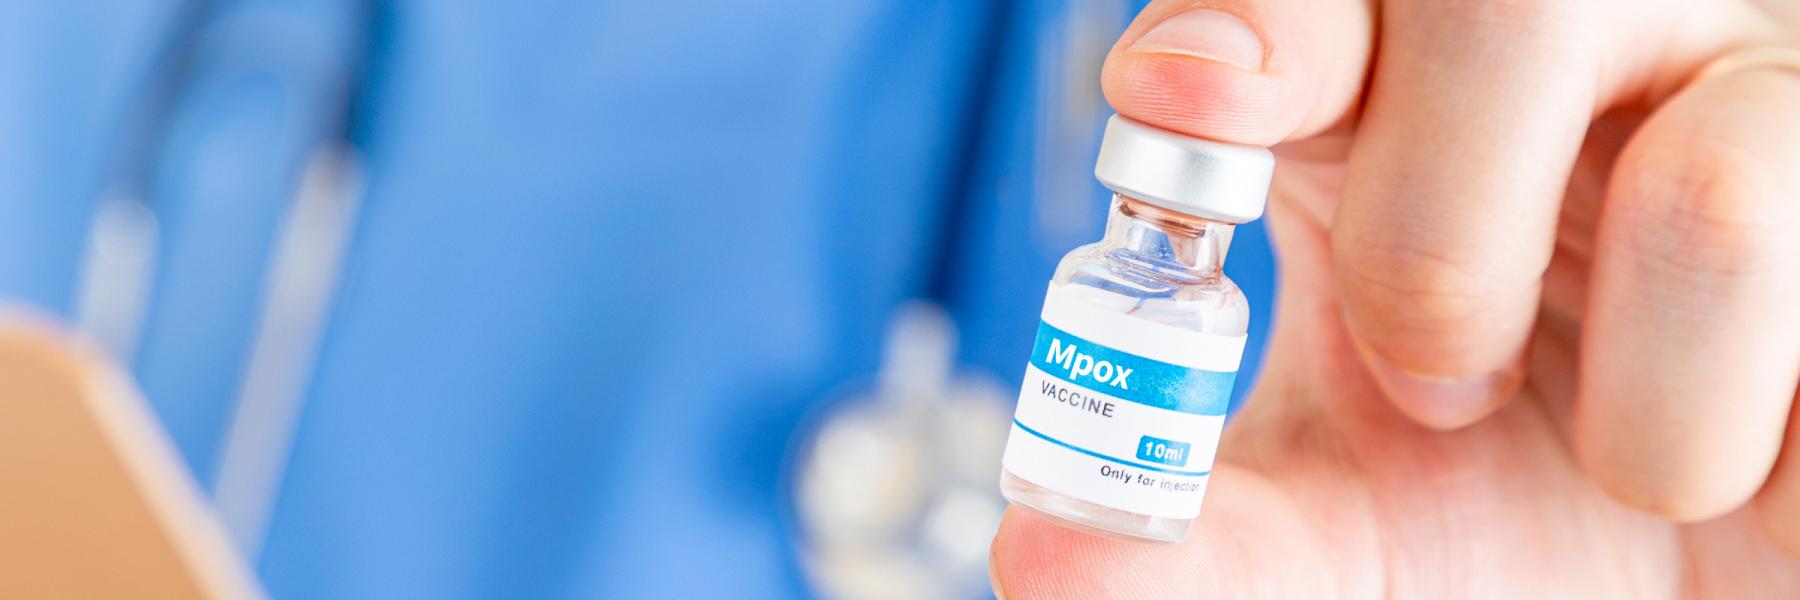 closeup of a vial of mpox vaccine, being held by a doctor